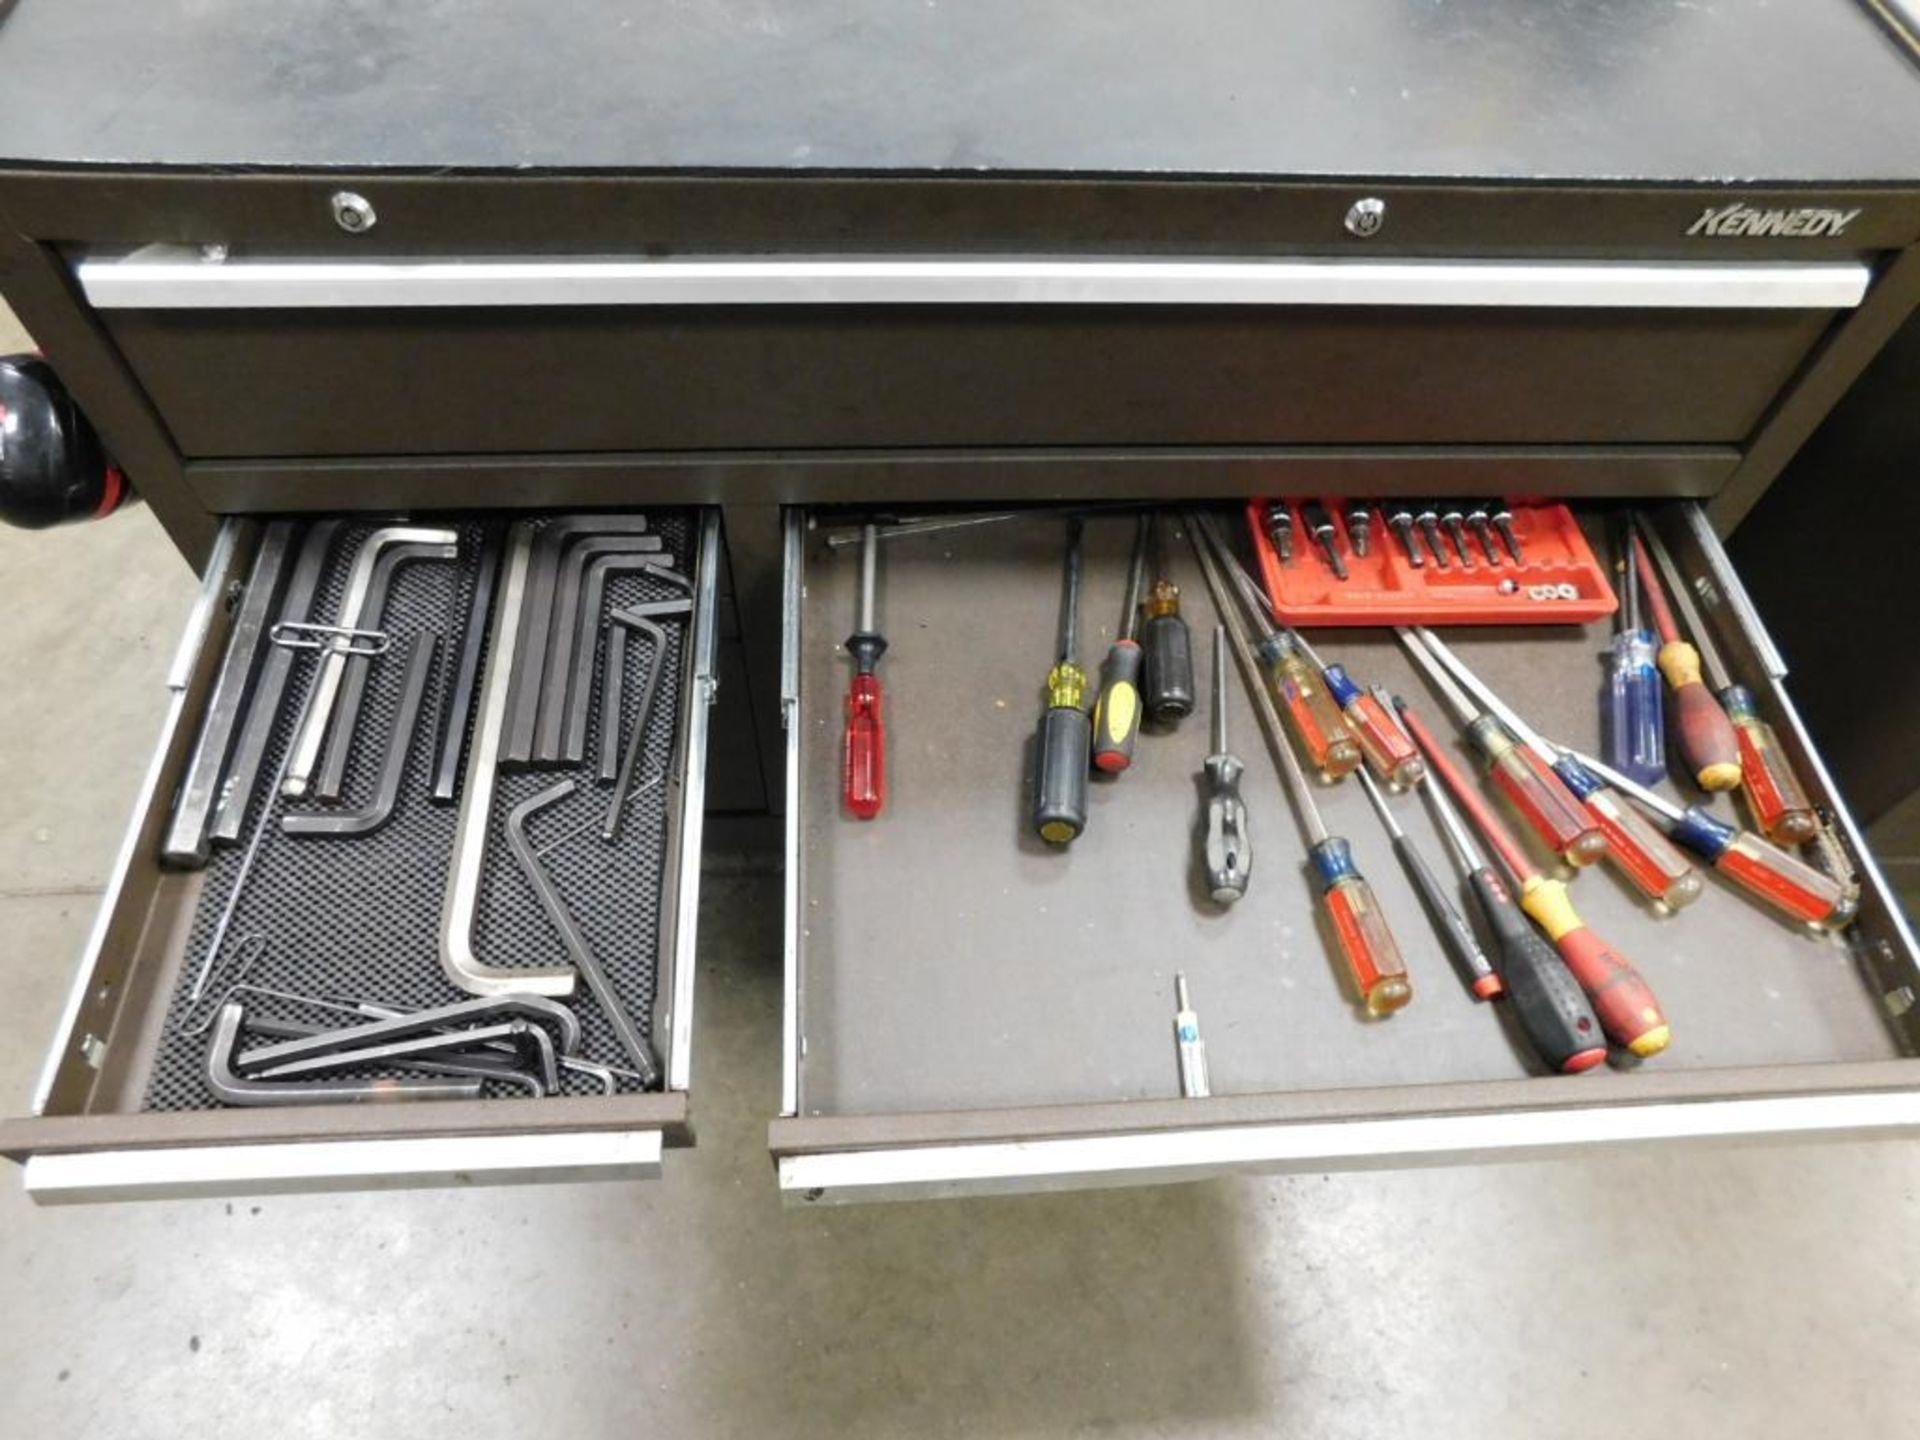 LOT: Kennedy 10-Drawer Rolling Tool Box w/Contents - Image 3 of 6